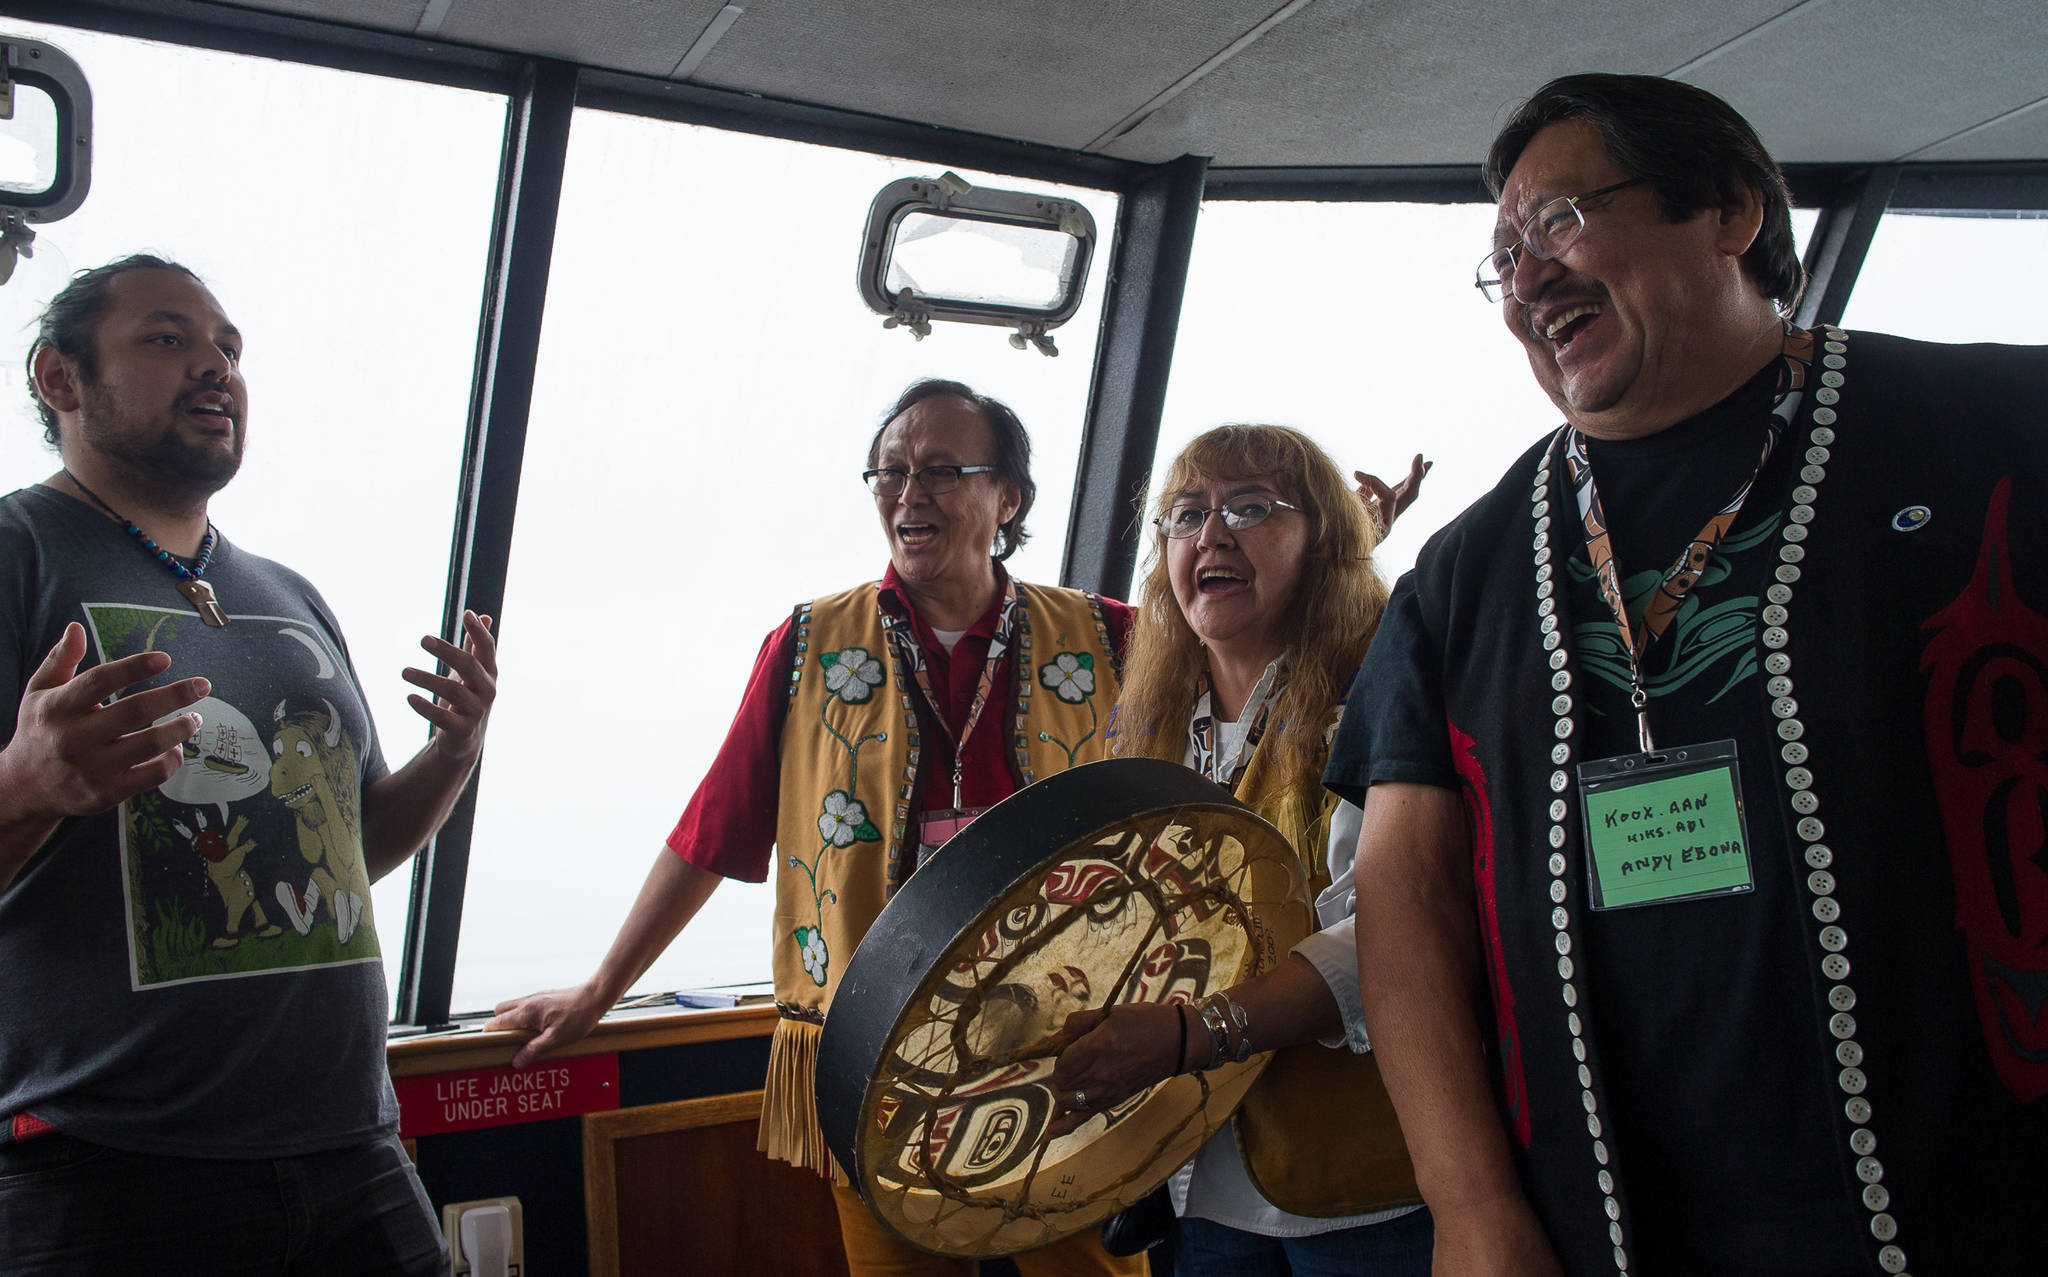 Raymond Gregory, left, Fausto Paulo, Jeannie Lee and Andy Ebona sing during the Douglas Indian Association’s boat trip to Taku Inlet to view traditional village sites on Friday, July 28, 2017.